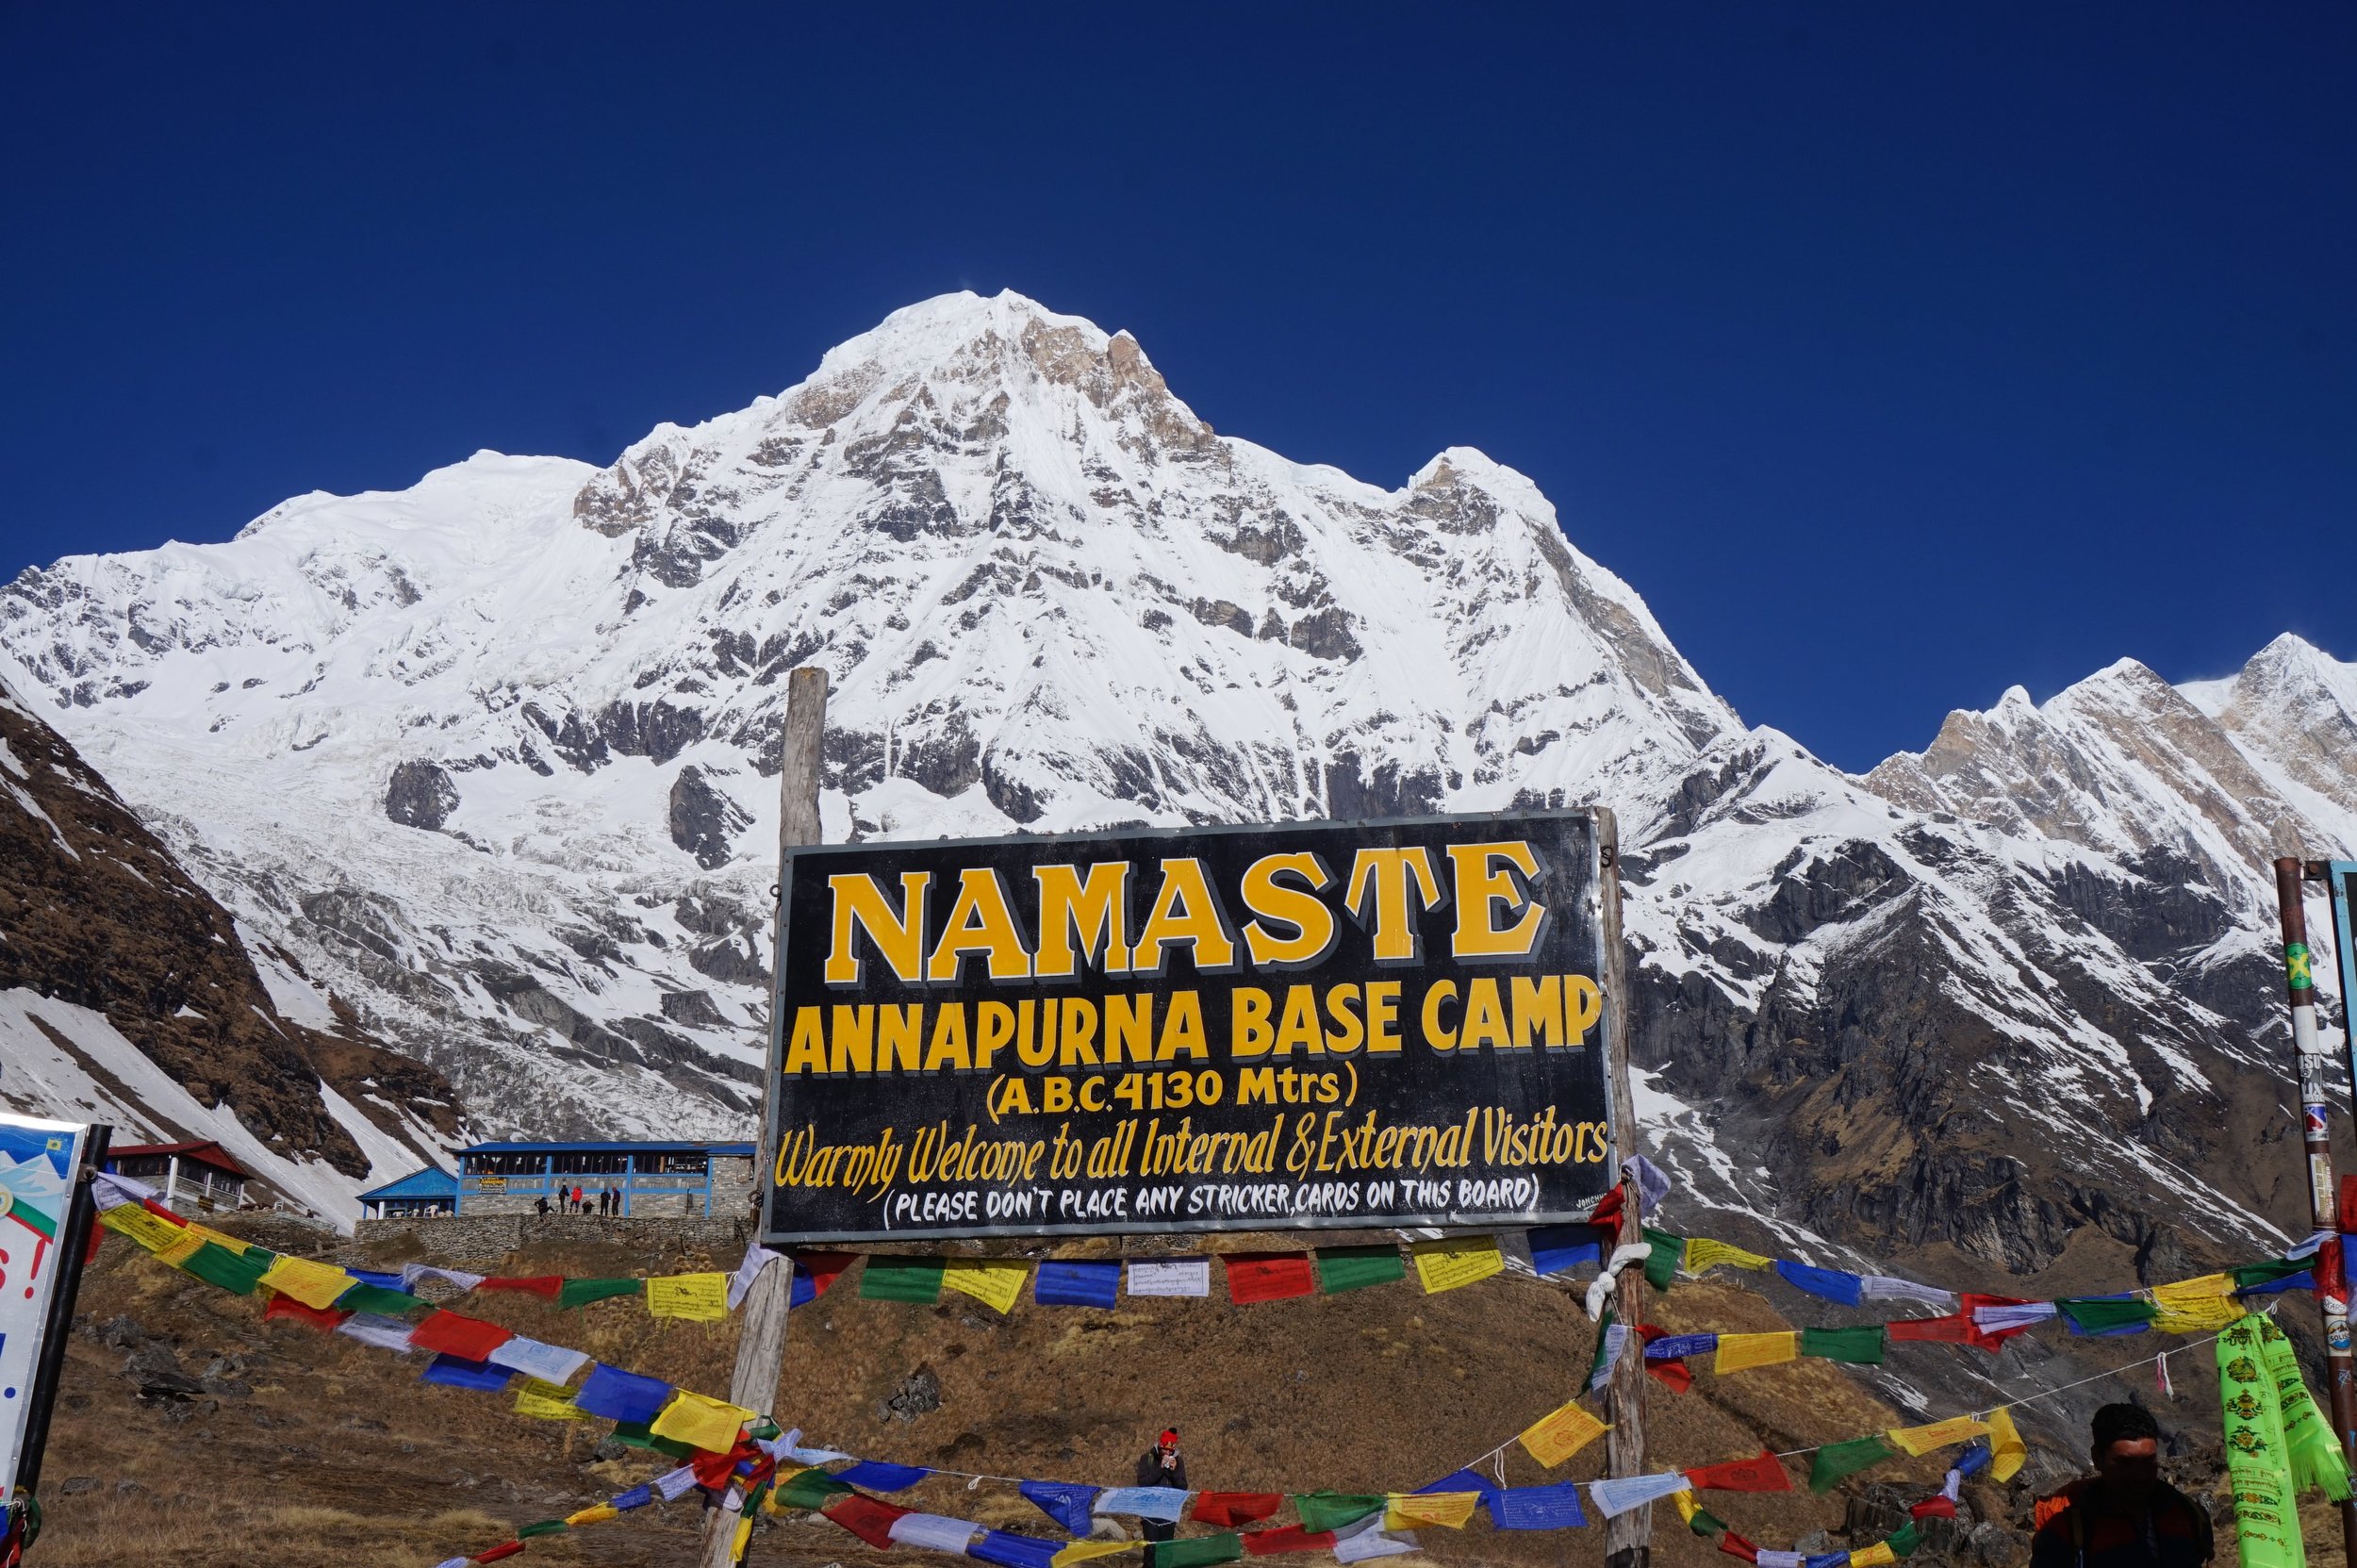 Annapurna Base Camp - Best Places to Visit in the Annapurna Region